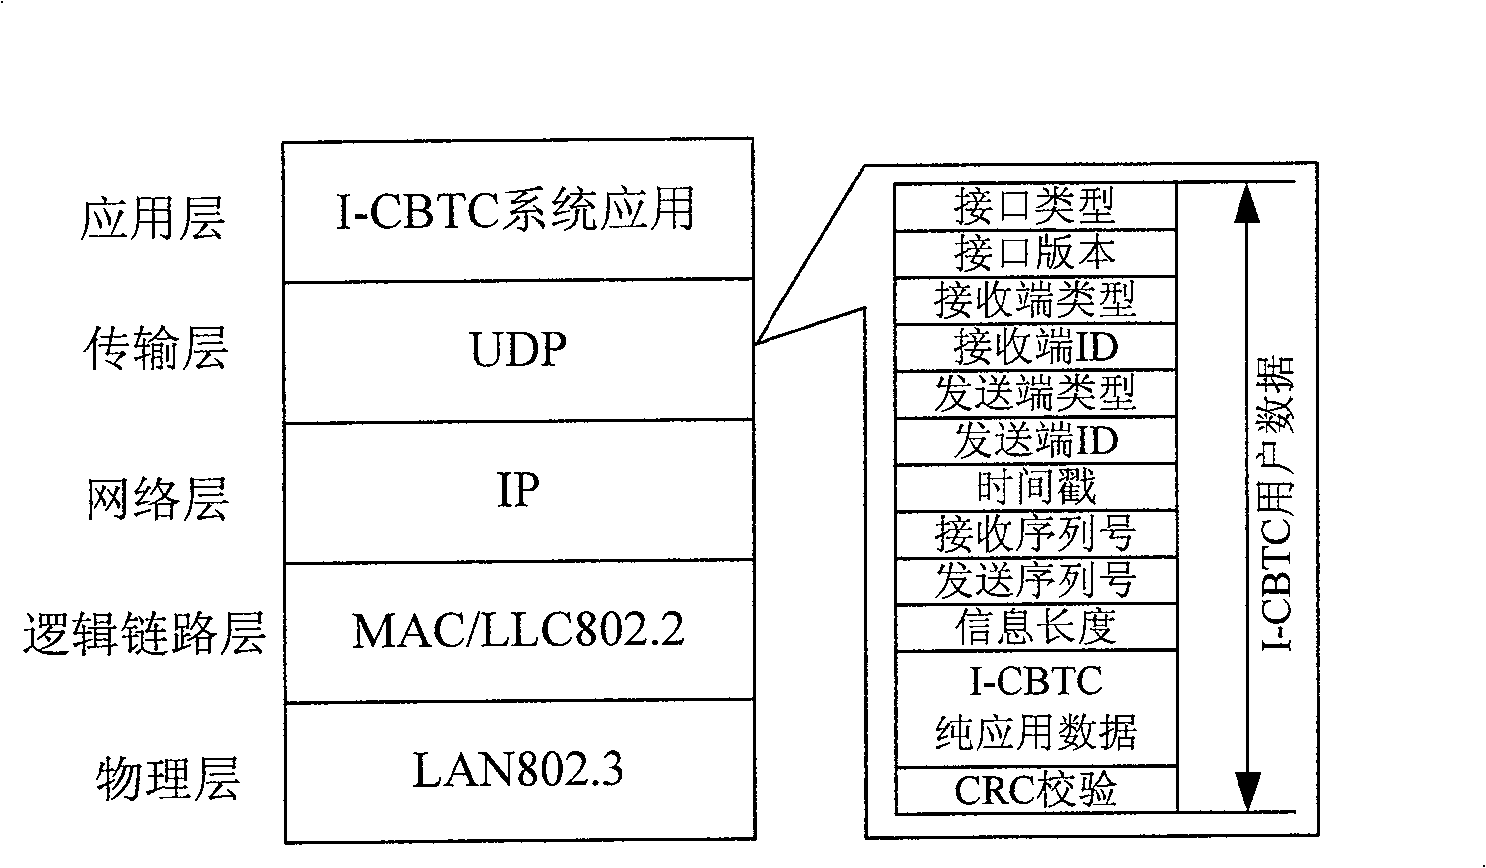 Communication-based interconnected and intercommunicated I-CBIT train operation control system